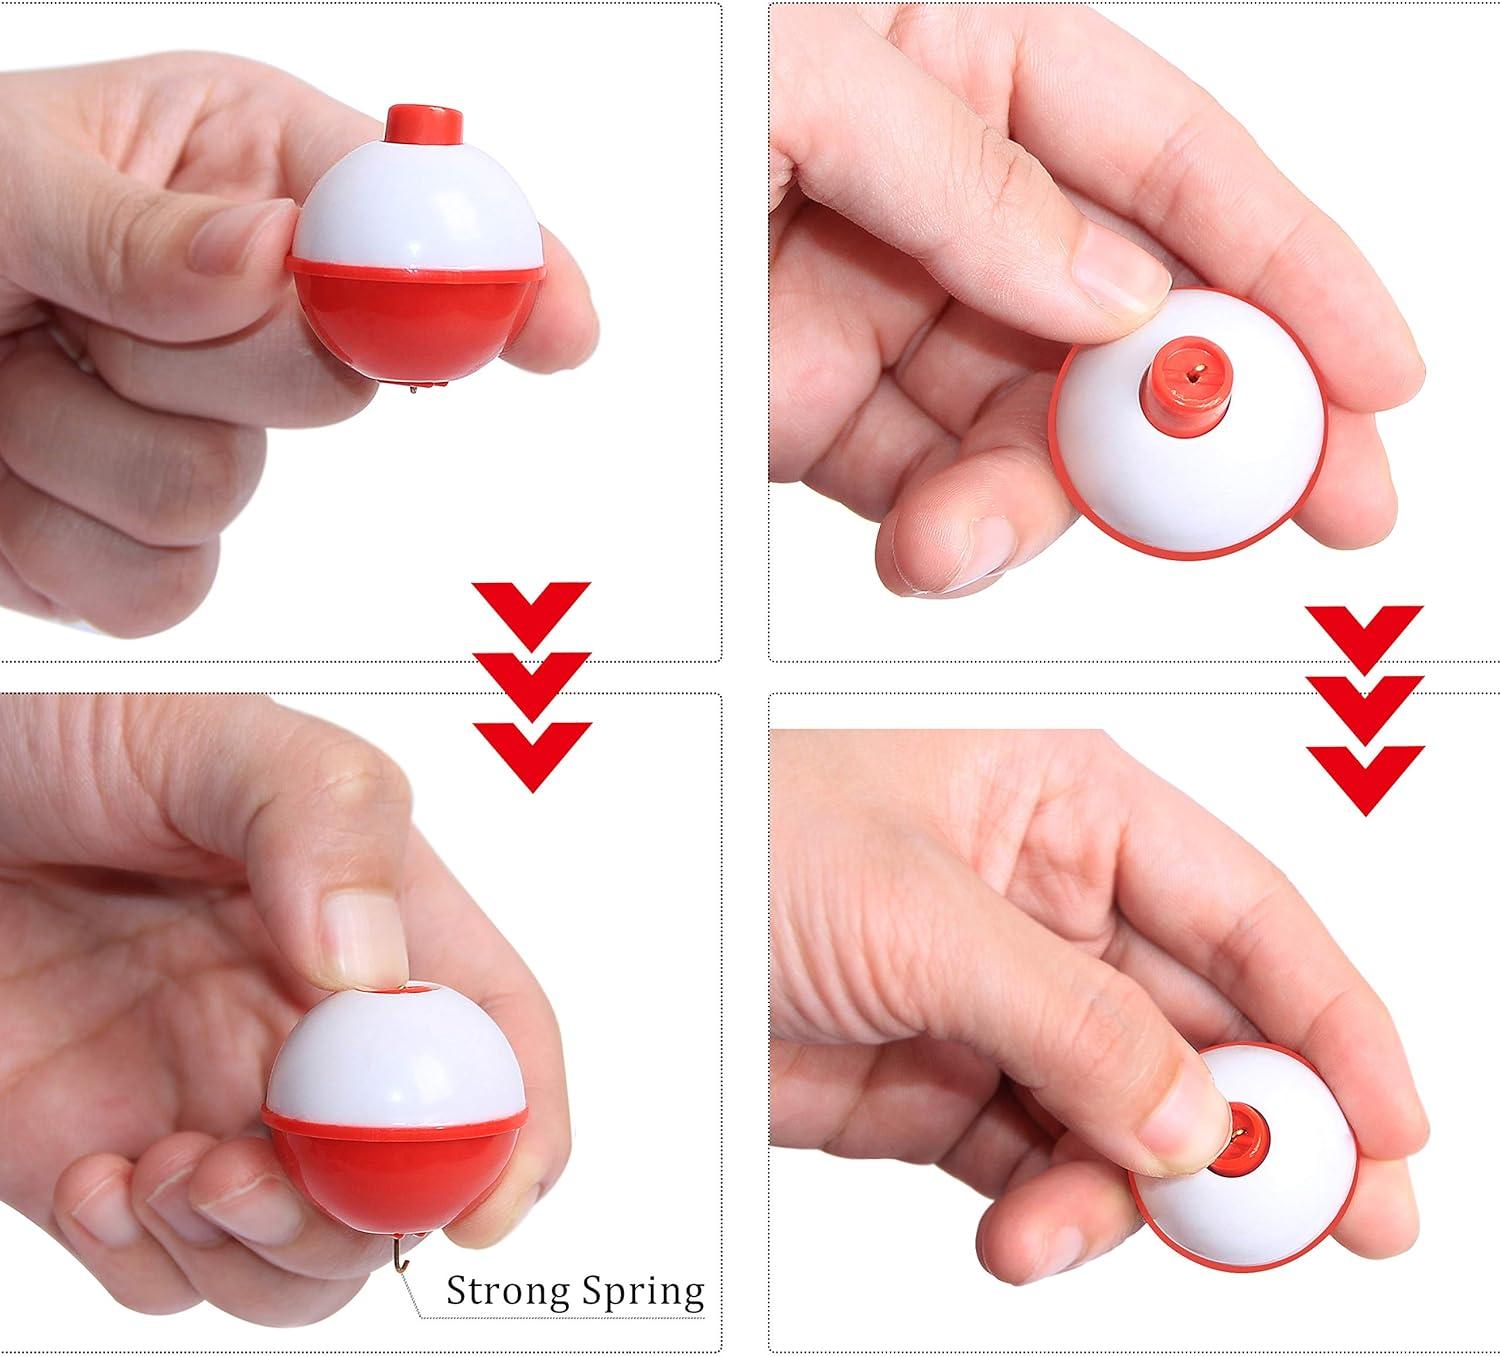 Fishing Bobbers Set Snap Hard ABS on Red/White Fishing Floats Bobbers Push  Button Round Buoy Floats Fishing Tackle Accessories Size:  0.5/0.75/1/1.25/1.5/2 Inch 10pcs-50pcs/lot 2.0 inch_pack of 10